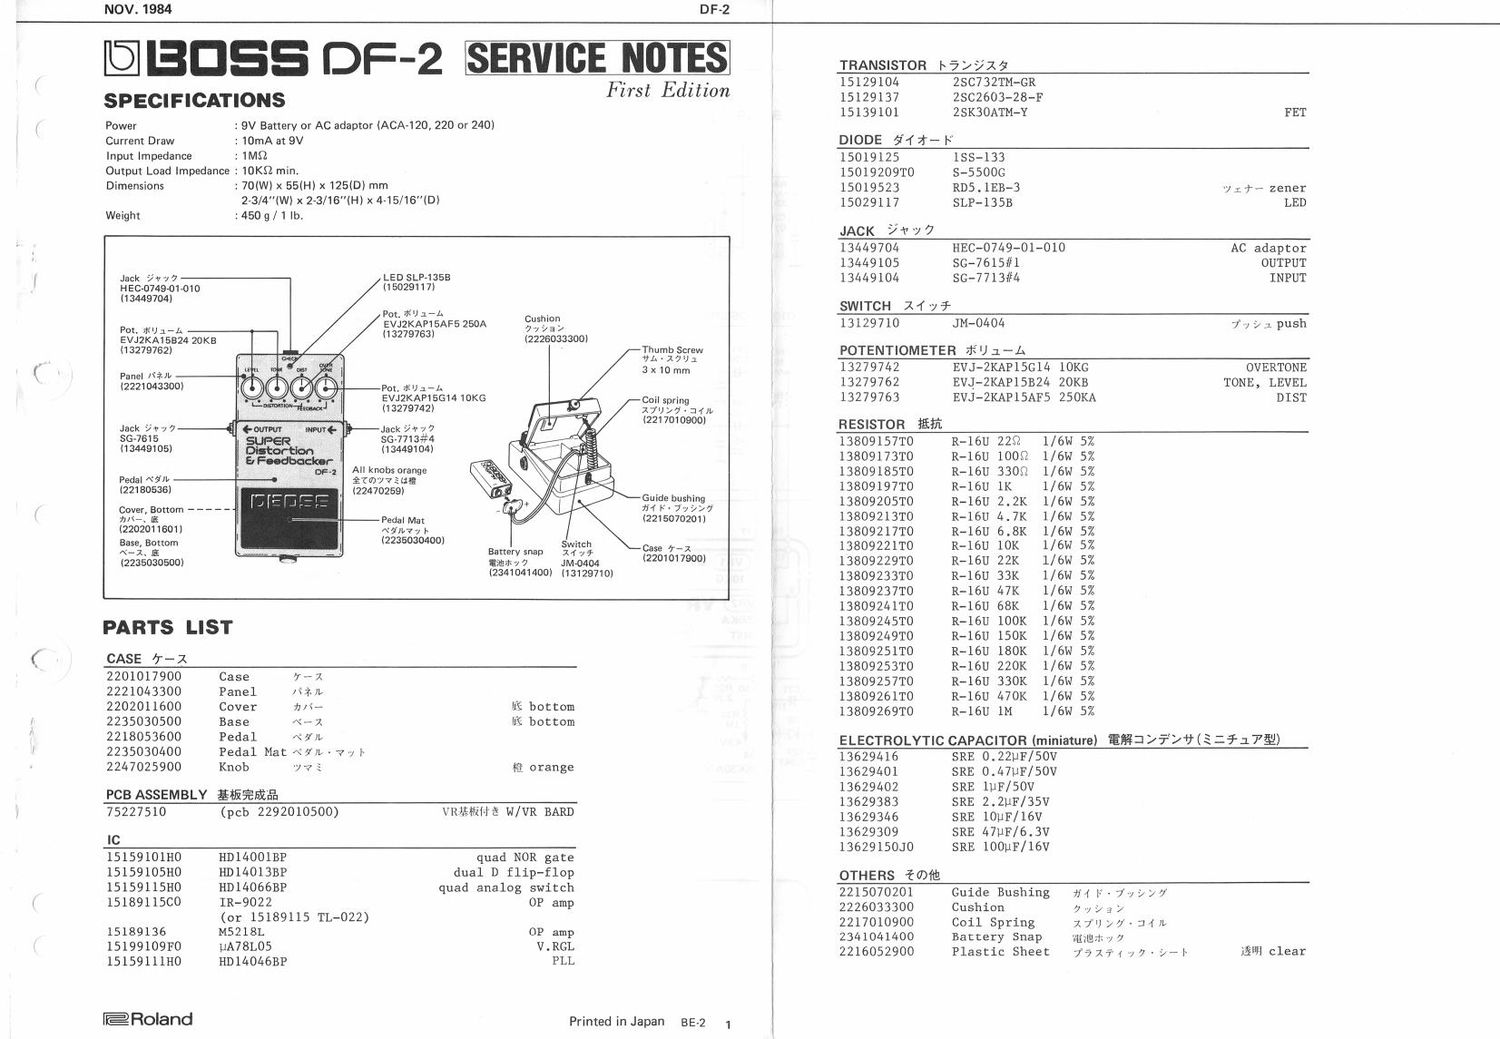 BOSS DF 2 SERVICE NOTES